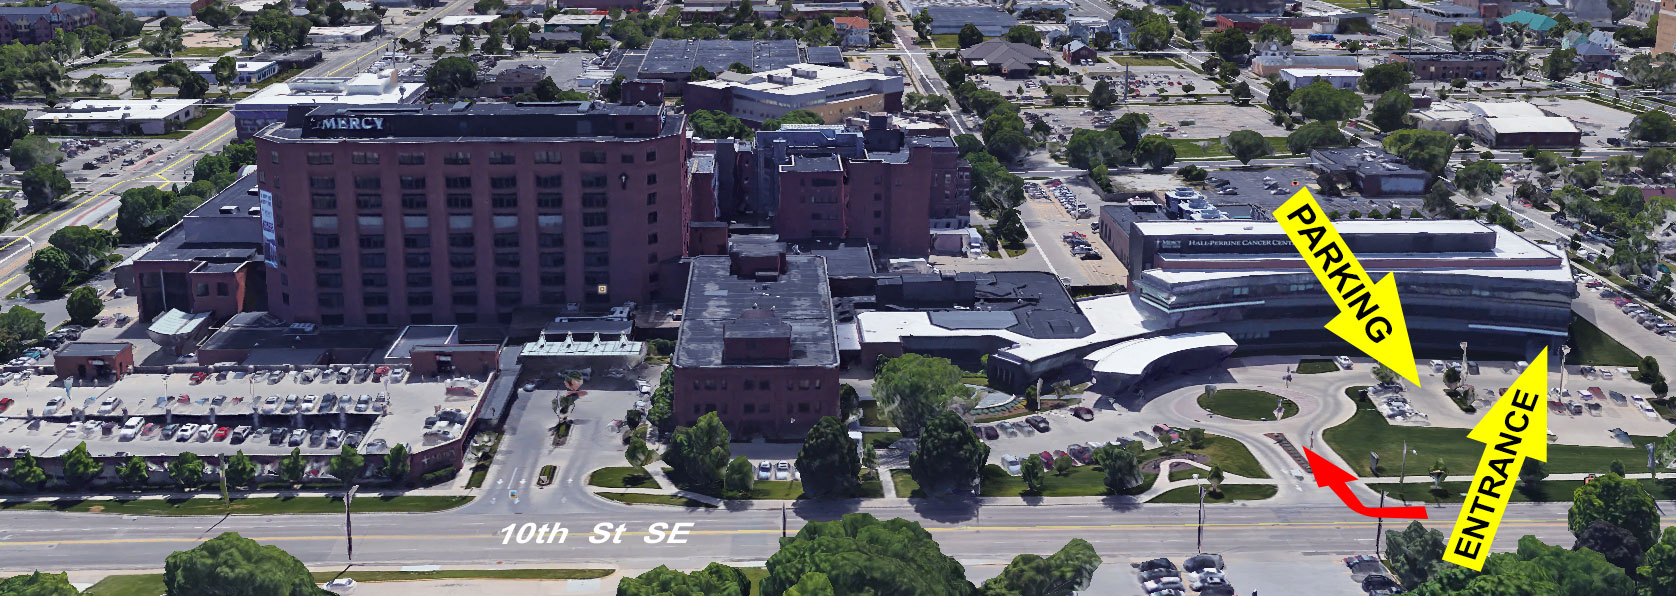 Mercy Medical Center aerial view